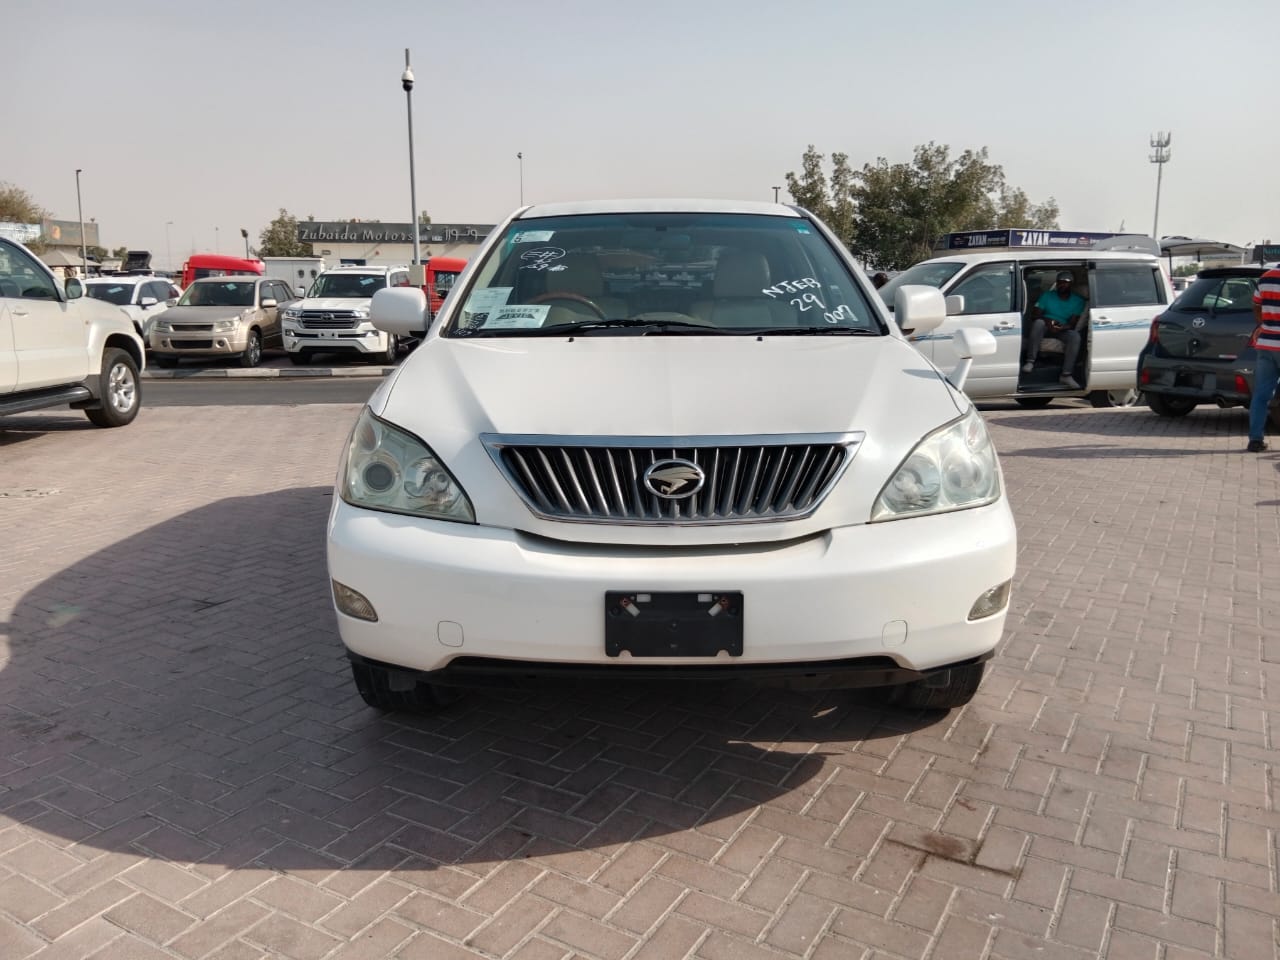 7961  TOYOTA HARRIER 2.4  A/T WHITE